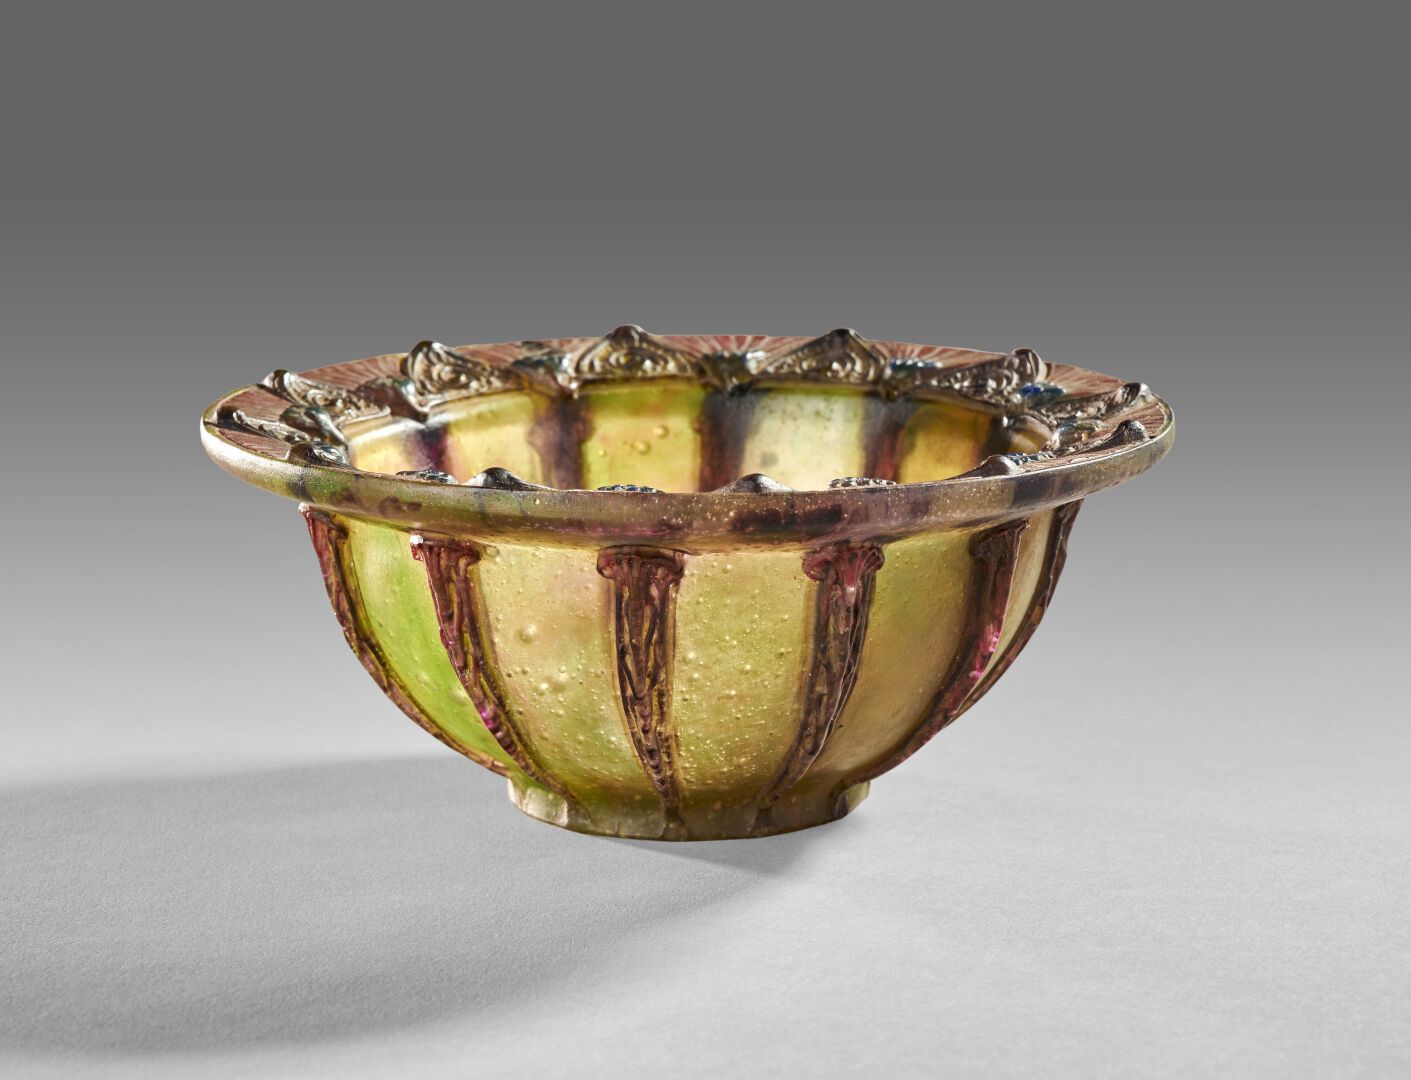 Null François-Emile DECORCHEMONT (1880-1971)

Bowl hollow marli decorated in gla&hellip;